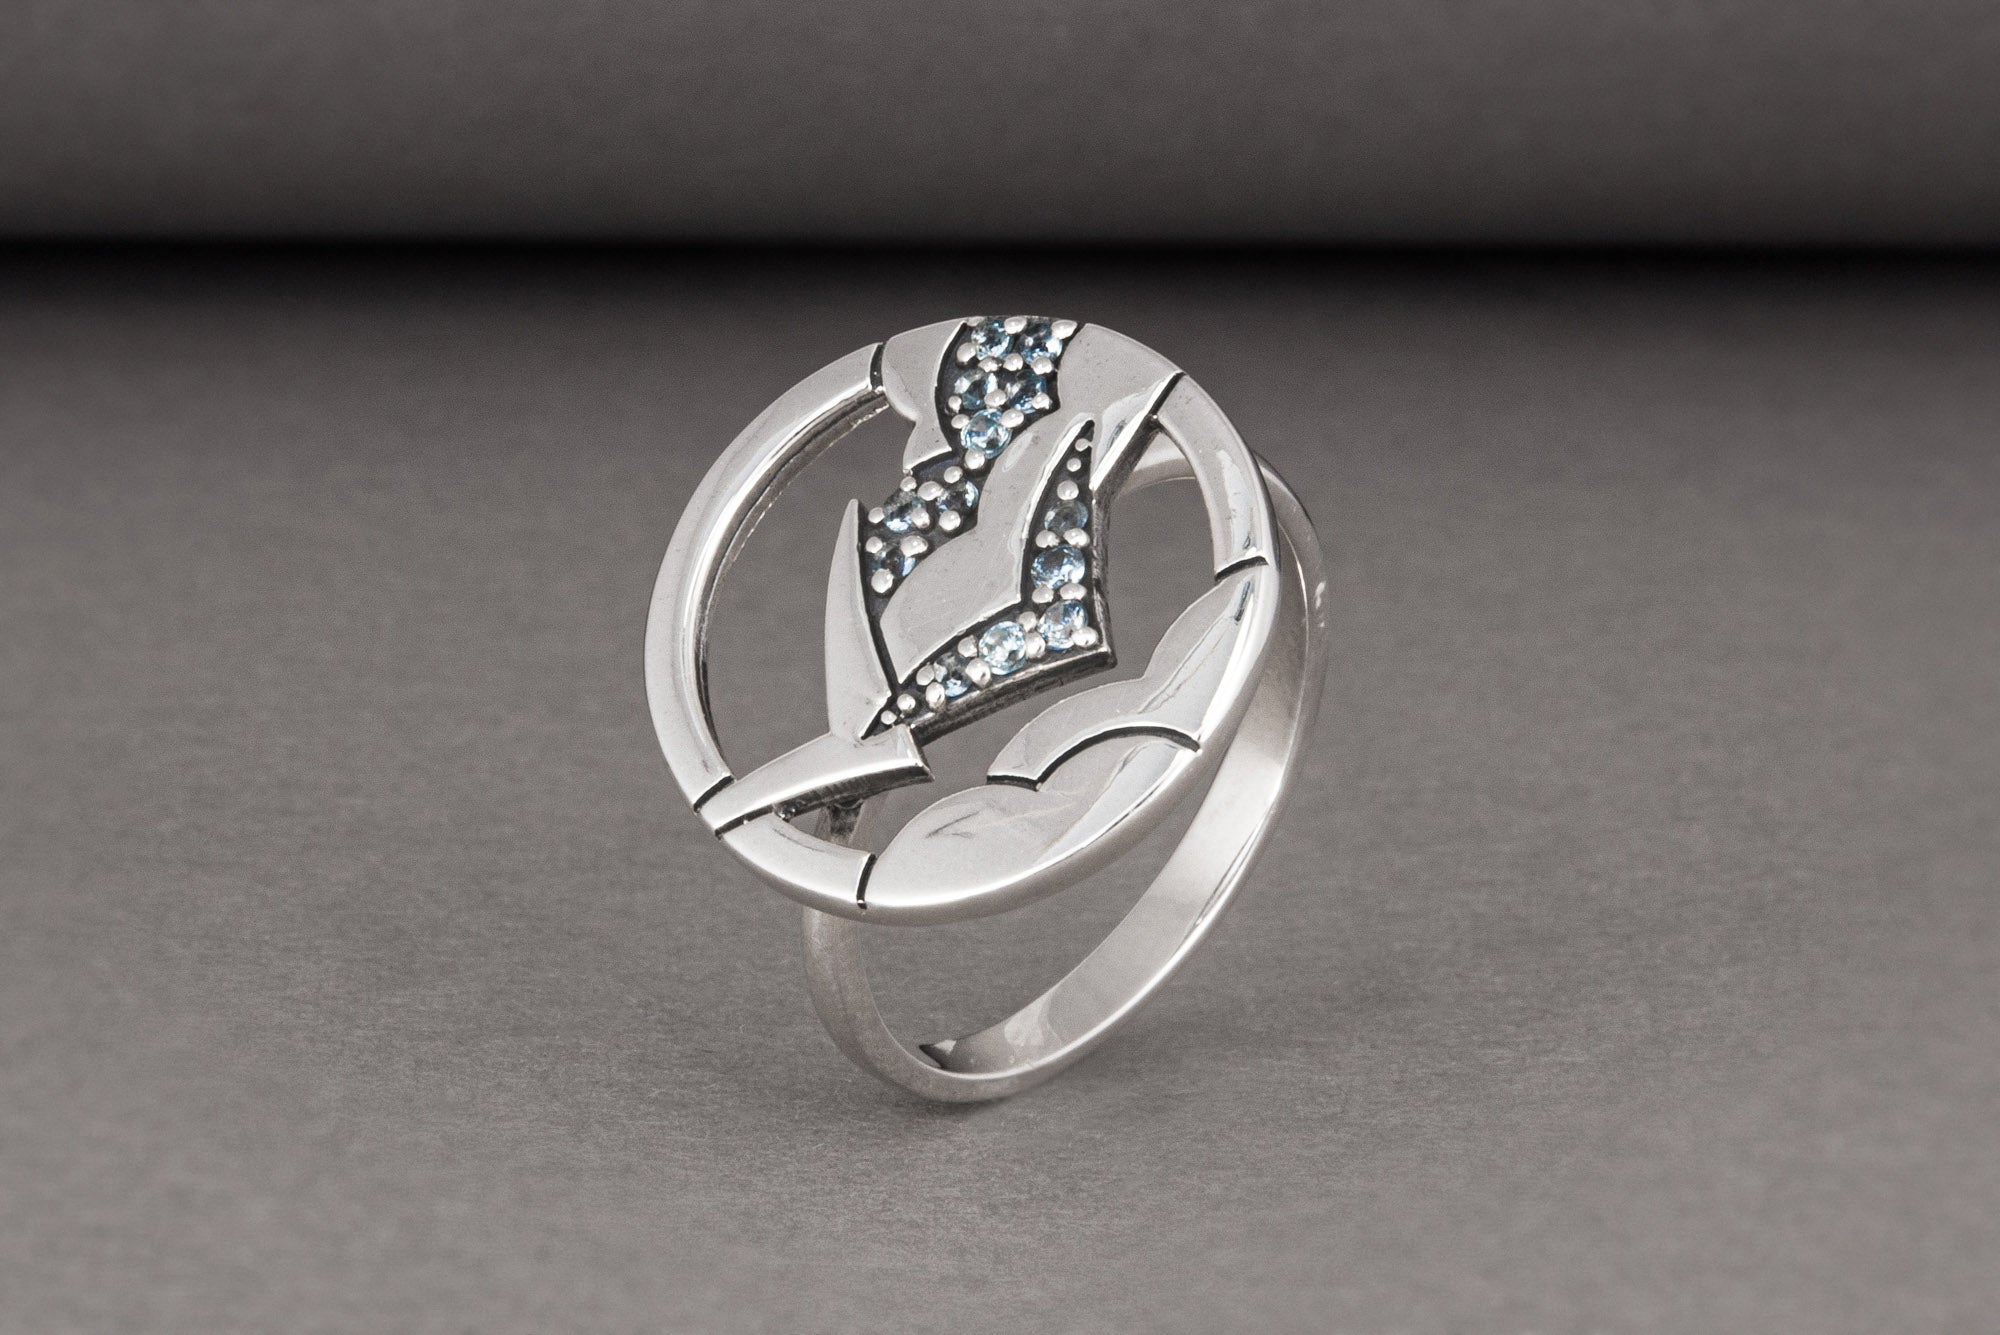 Minimalistic Round 925 Silver Ring with Clouds and Blue Gems, Unique Fashion Jewelry - vikingworkshop